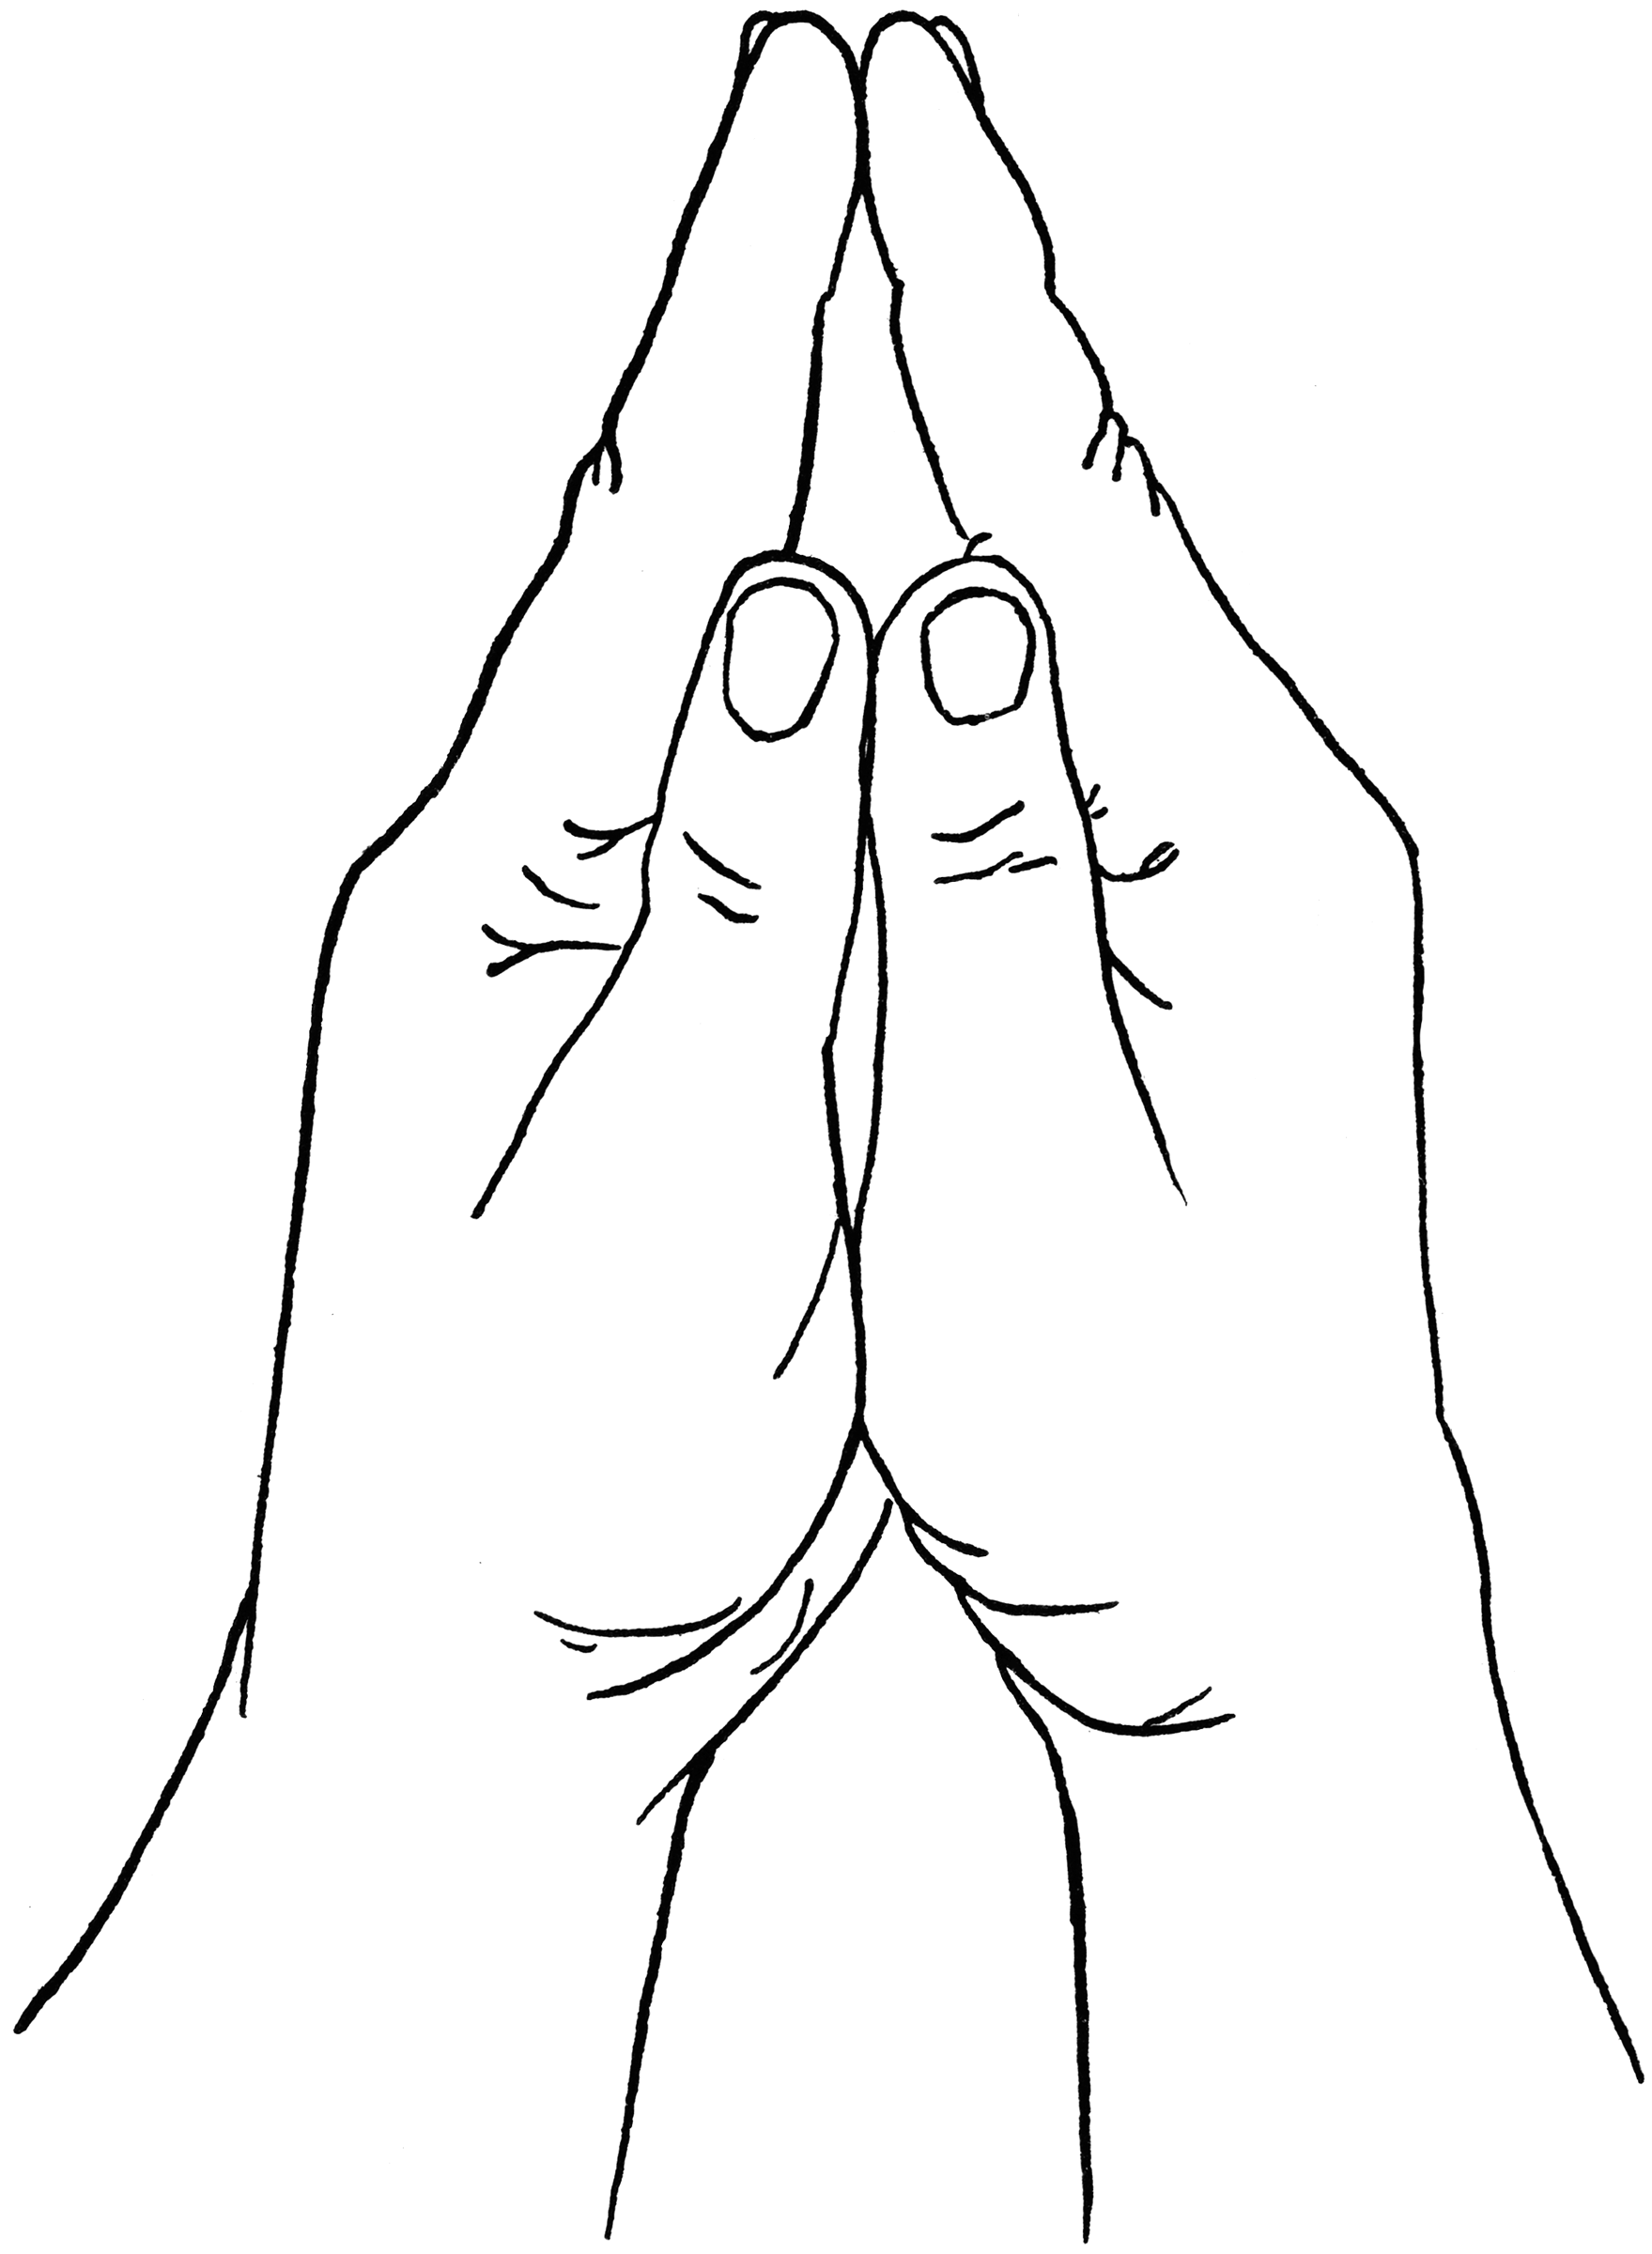 Praying Positioned Hands | ClipArt ETC